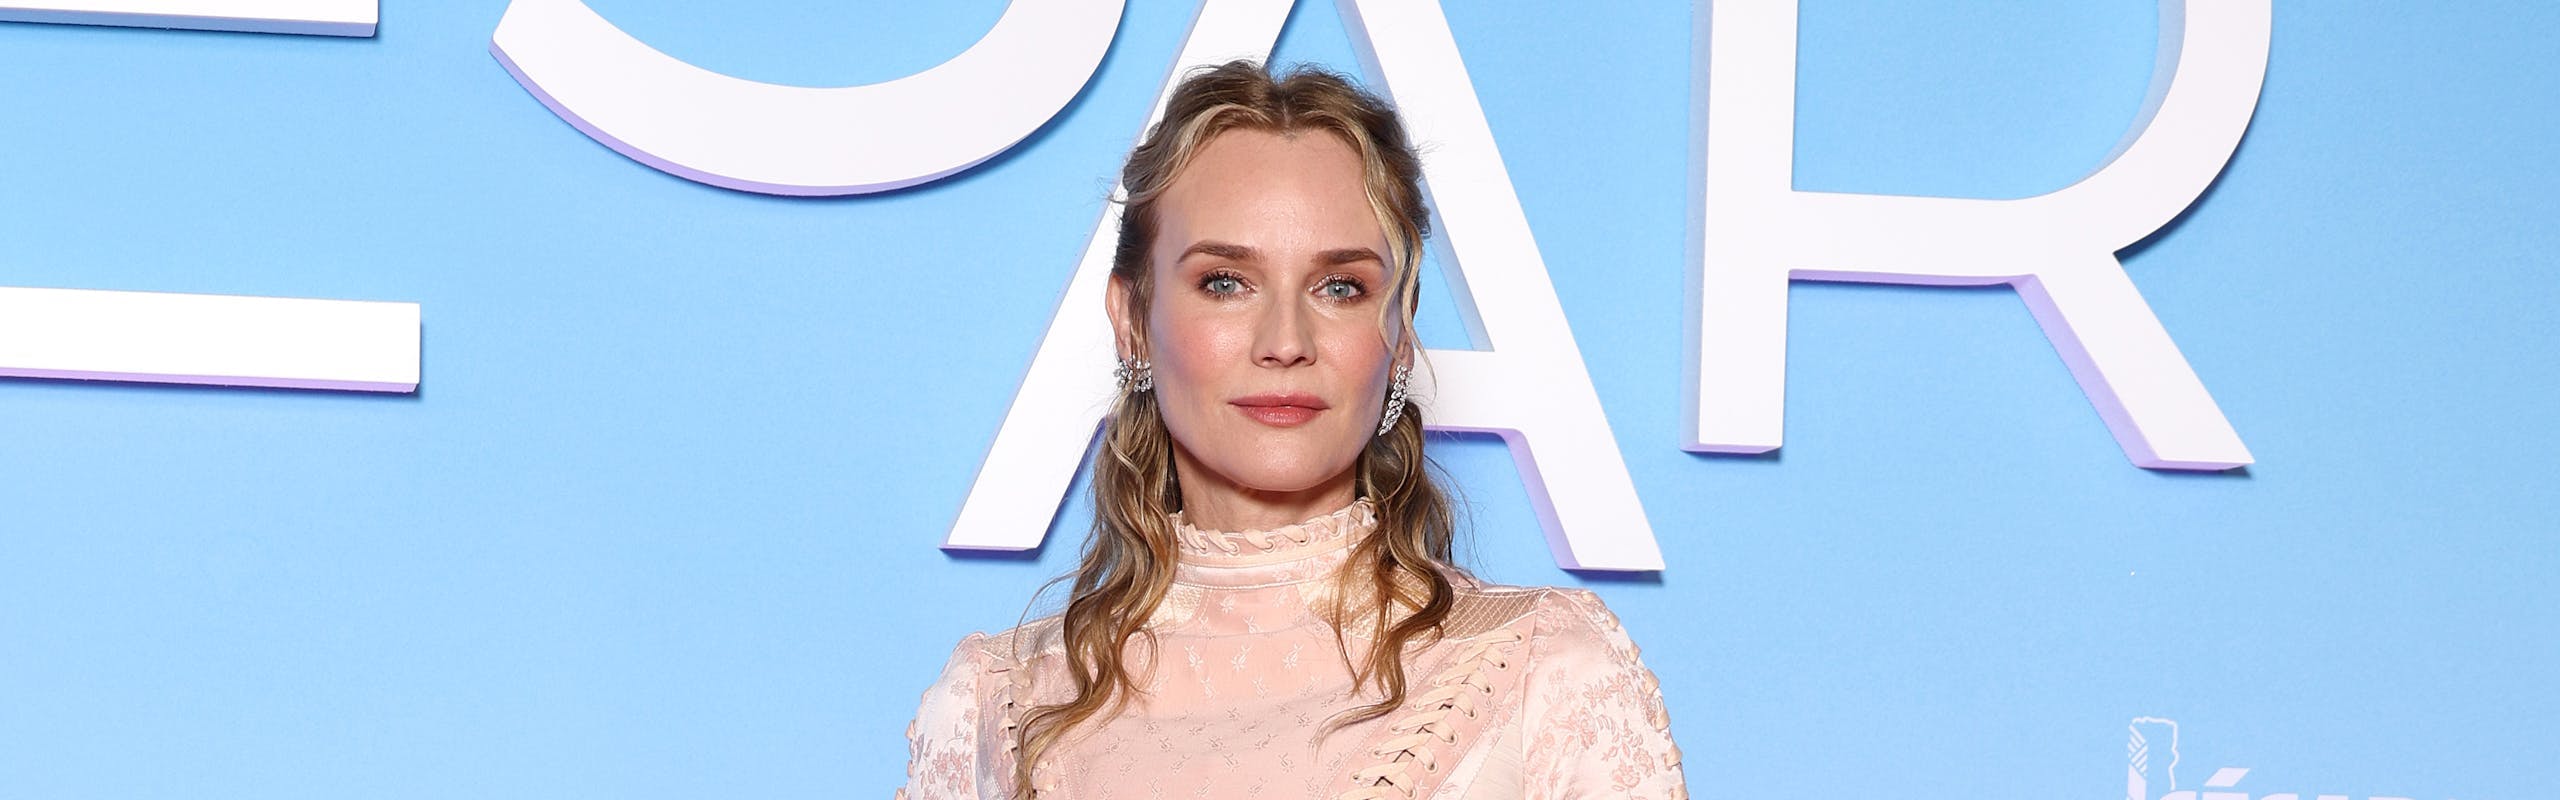 Diane Kruger in a pink high-neck long sleeve dress with a short hoop skirt lined with bows.